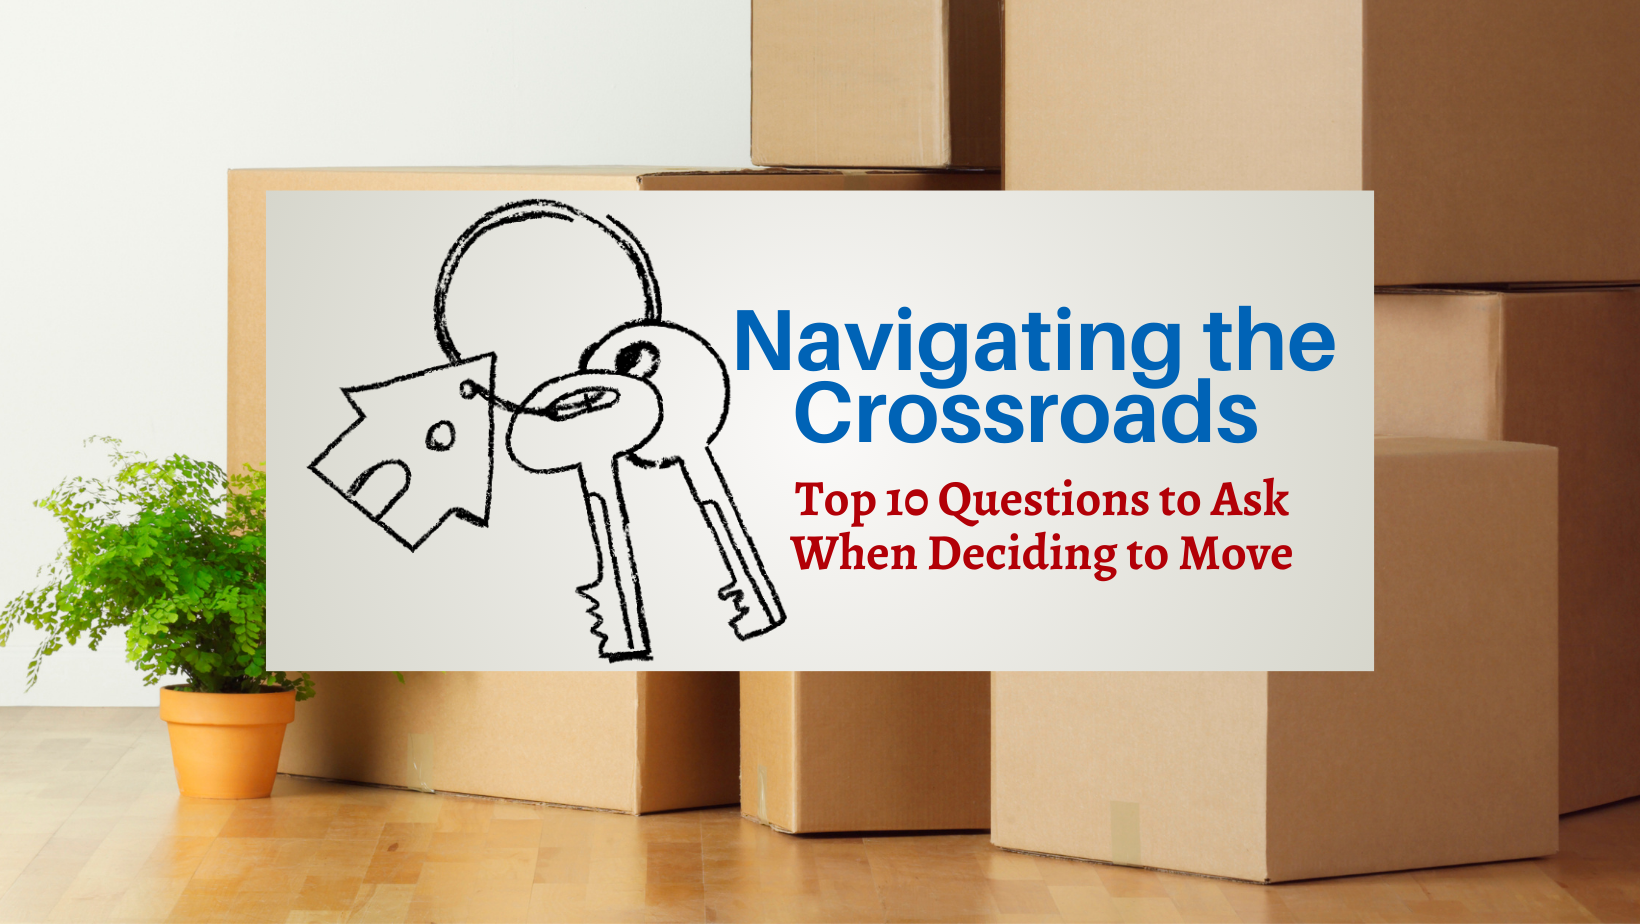 Top 10 Questions to Ask When Deciding to Move